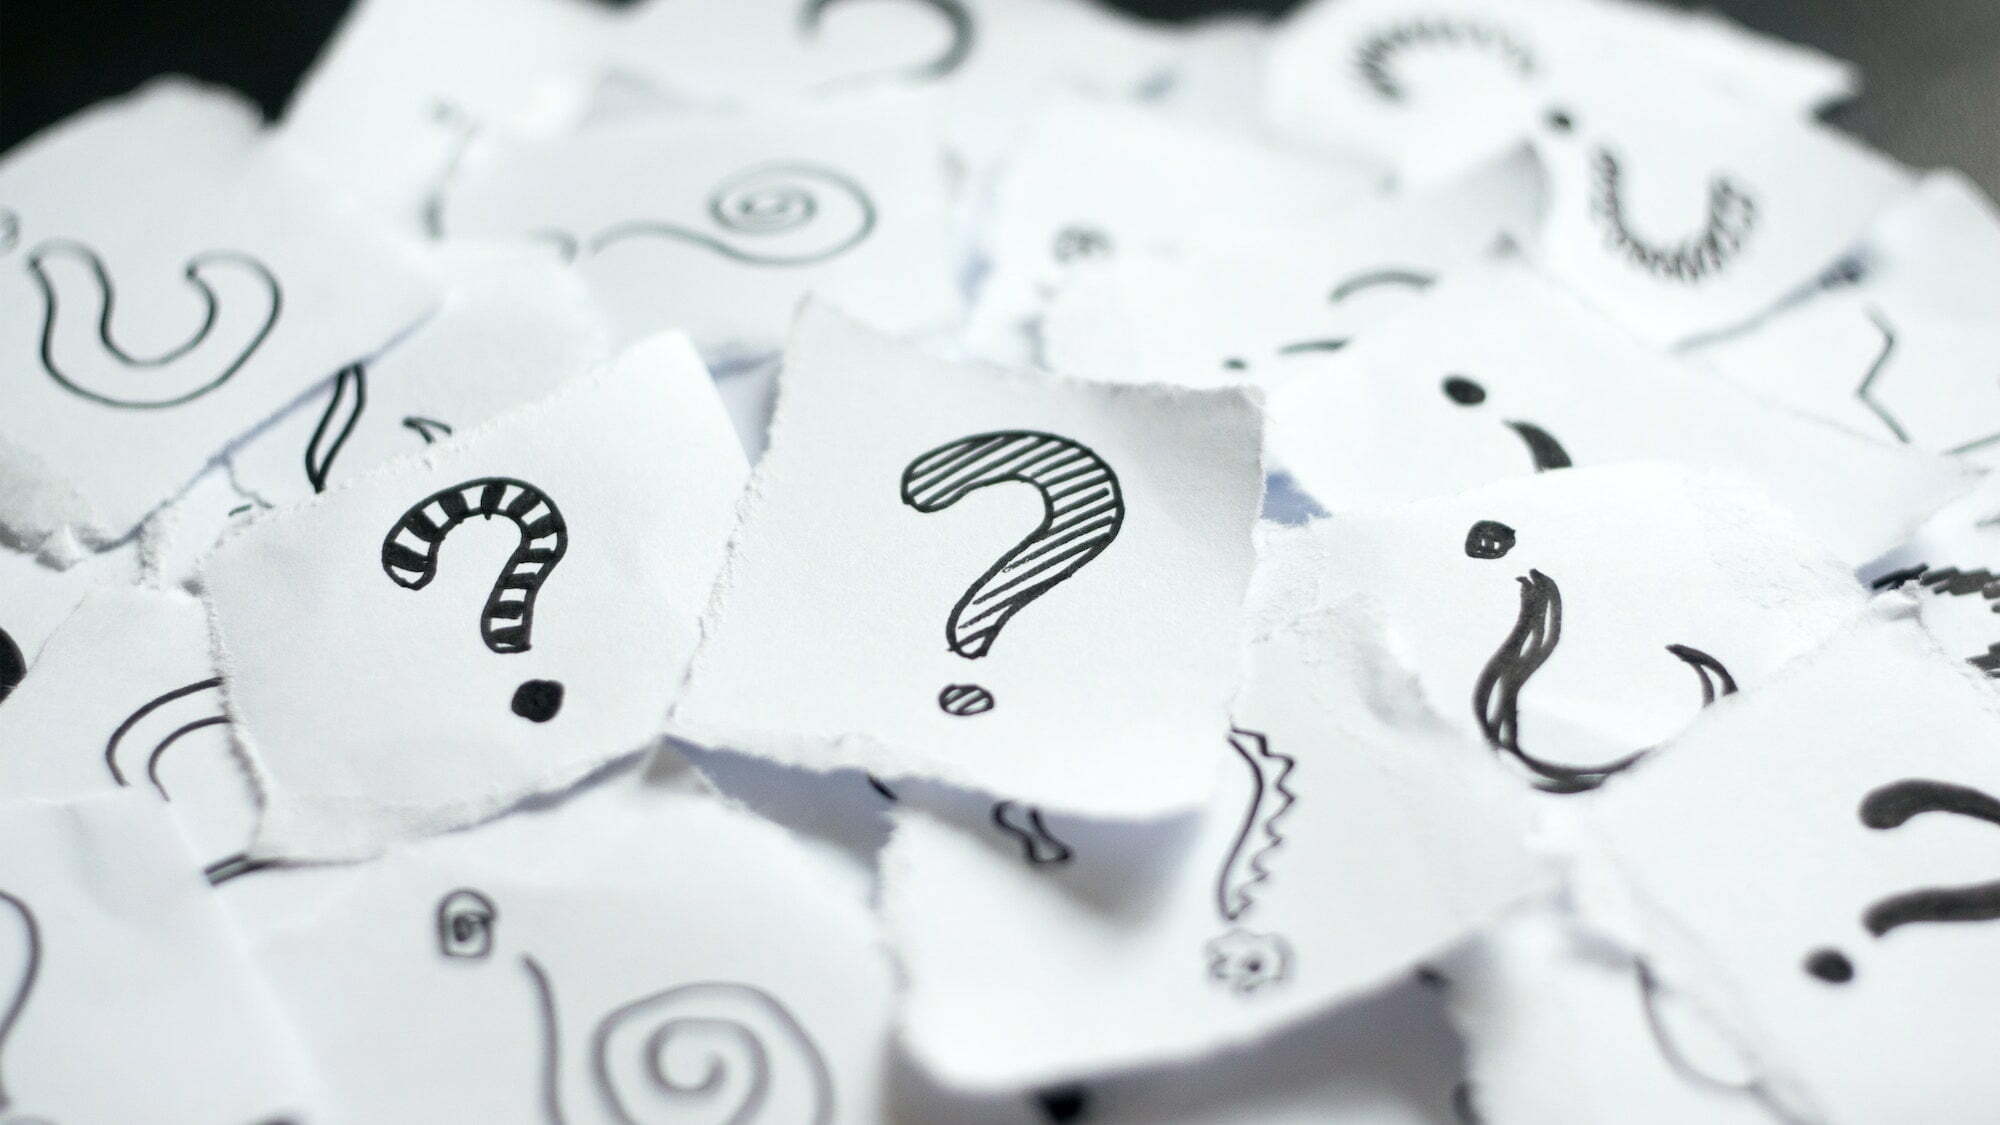 Many question marks on white papers. Doodle drawn question marks on scraps of paper. Choice